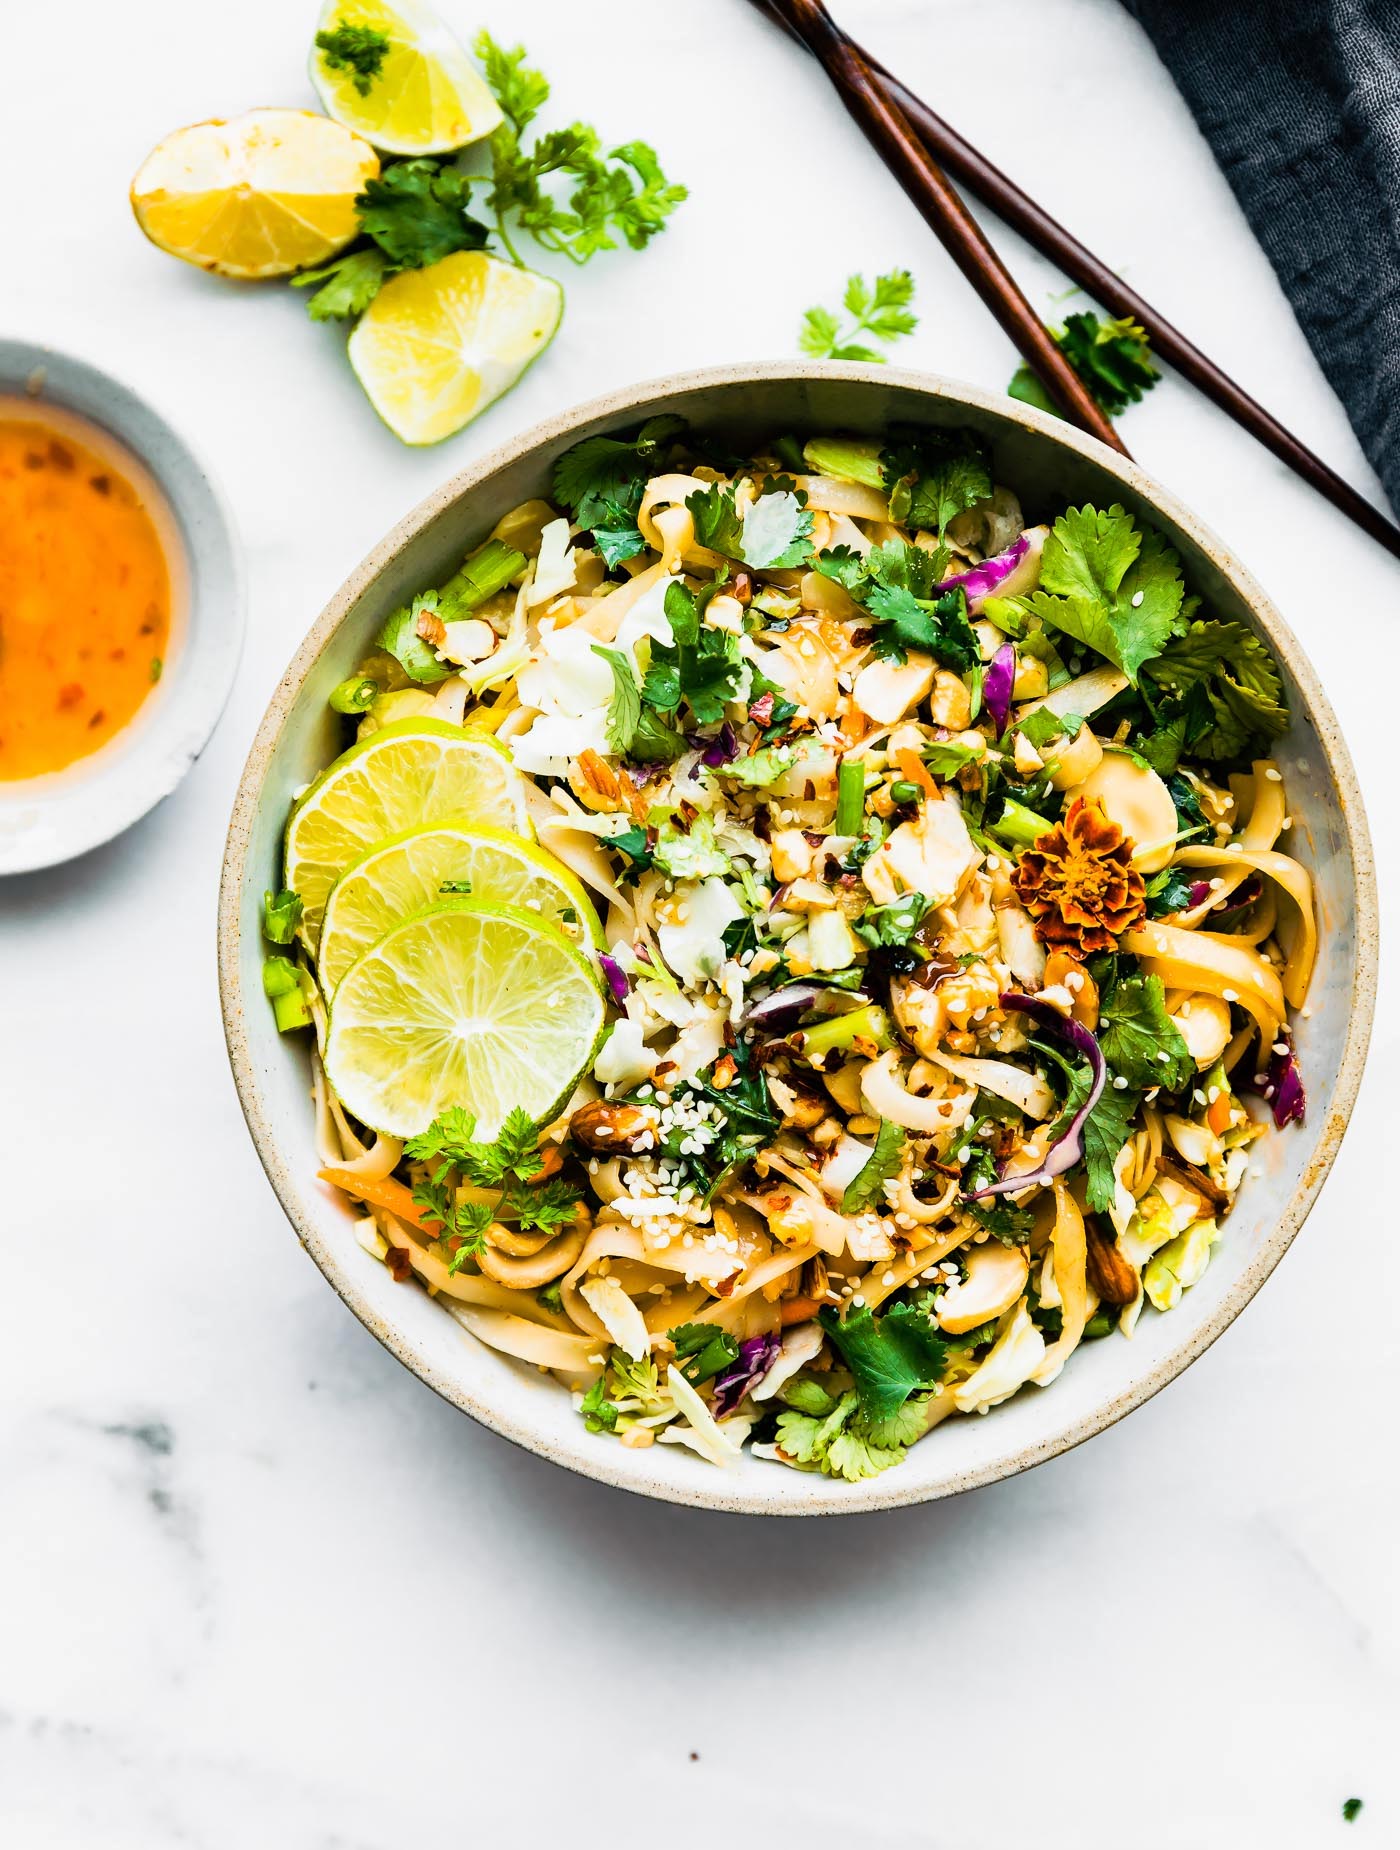 Spicy Thai rice noodle salad in bowl on white counter.